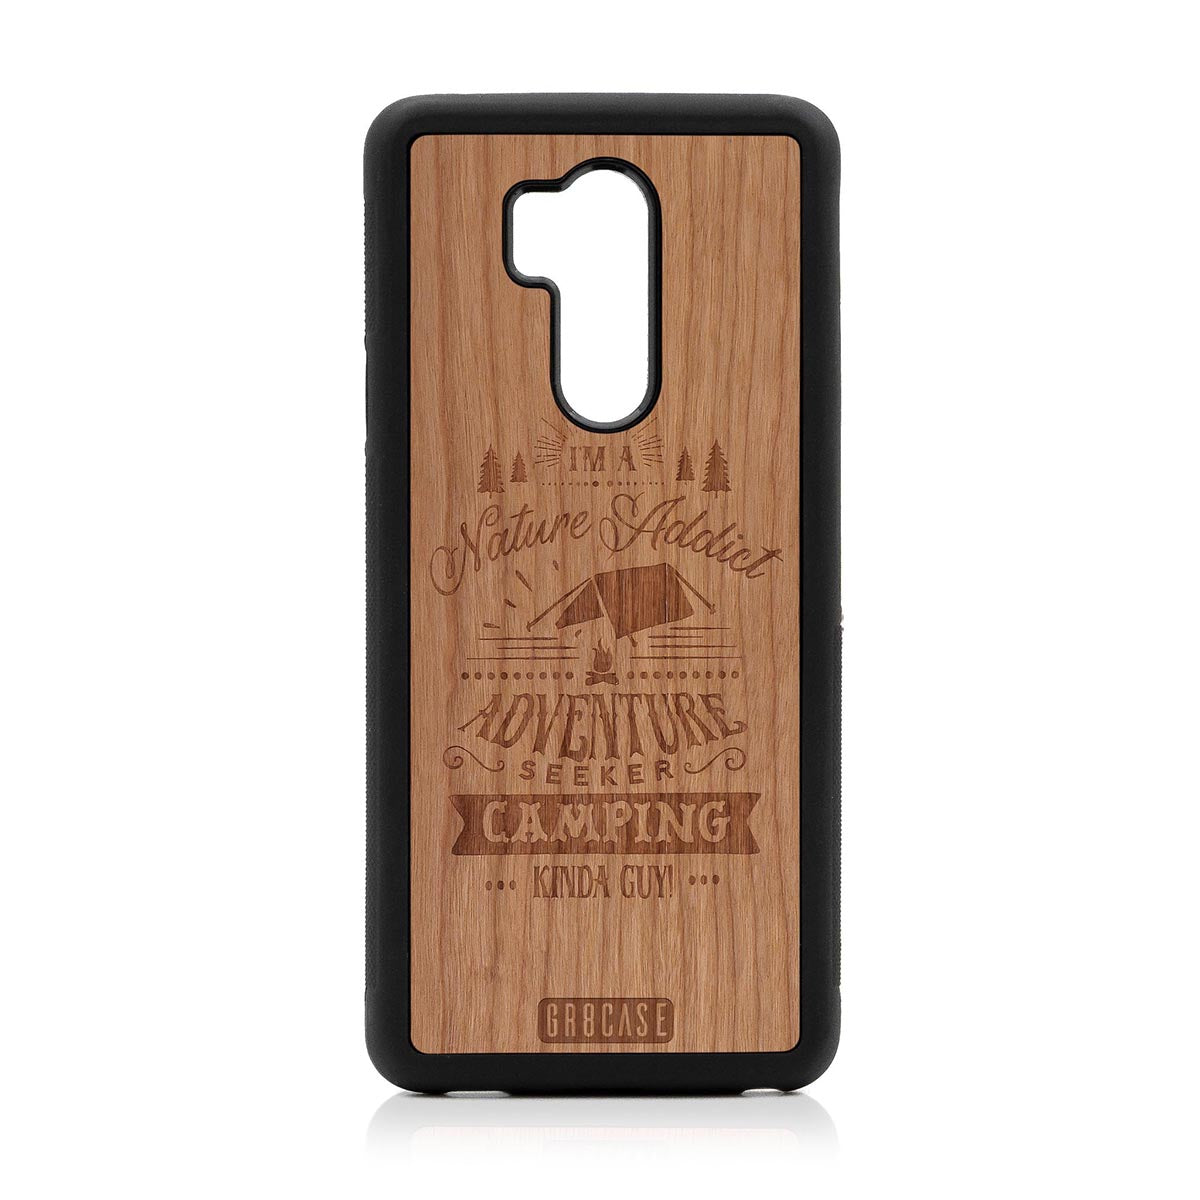 I'm A Nature Addict Adventure Seeker Camping Kinda Guy Design Wood Case LG G7 ThinQ by GR8CASE